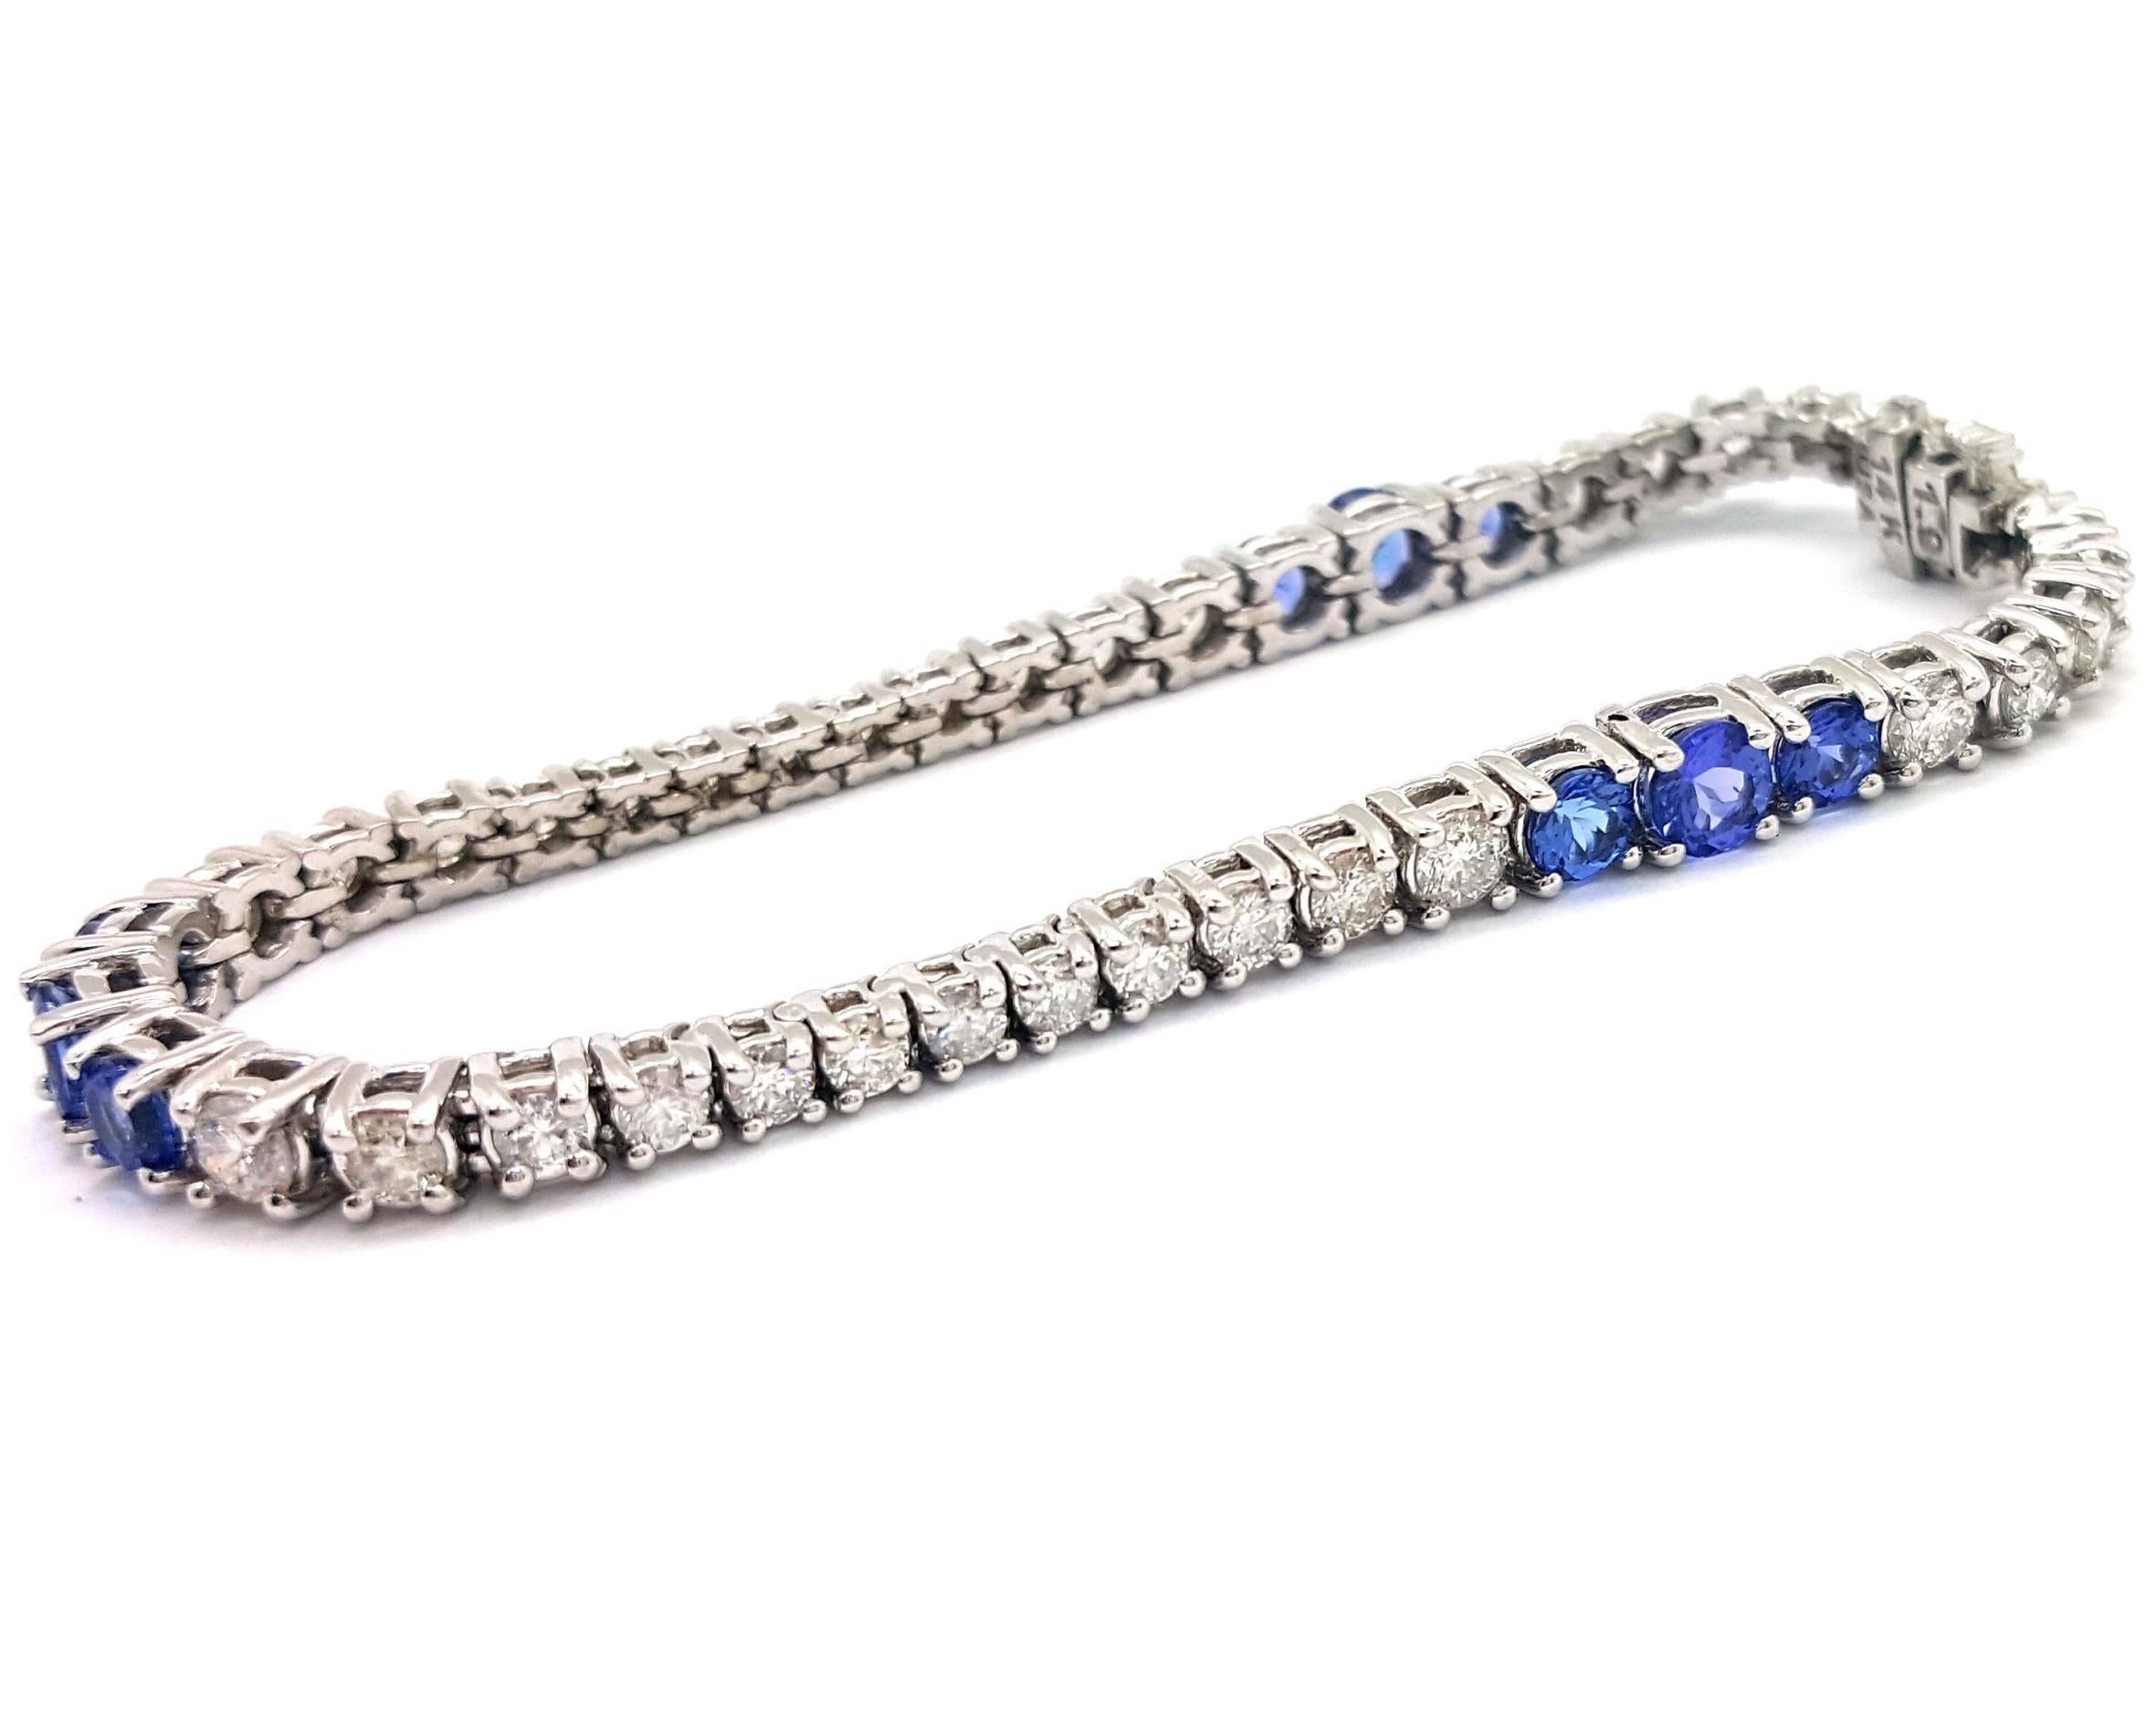 Noteworthy Color! This contemporary 14k white gold tanzanite and diamond bracelet is designed with 38 round brilliant cut diamonds set between three groups of three tanzanite gemstones. The way this bracelet is set makes it seem to undulate along